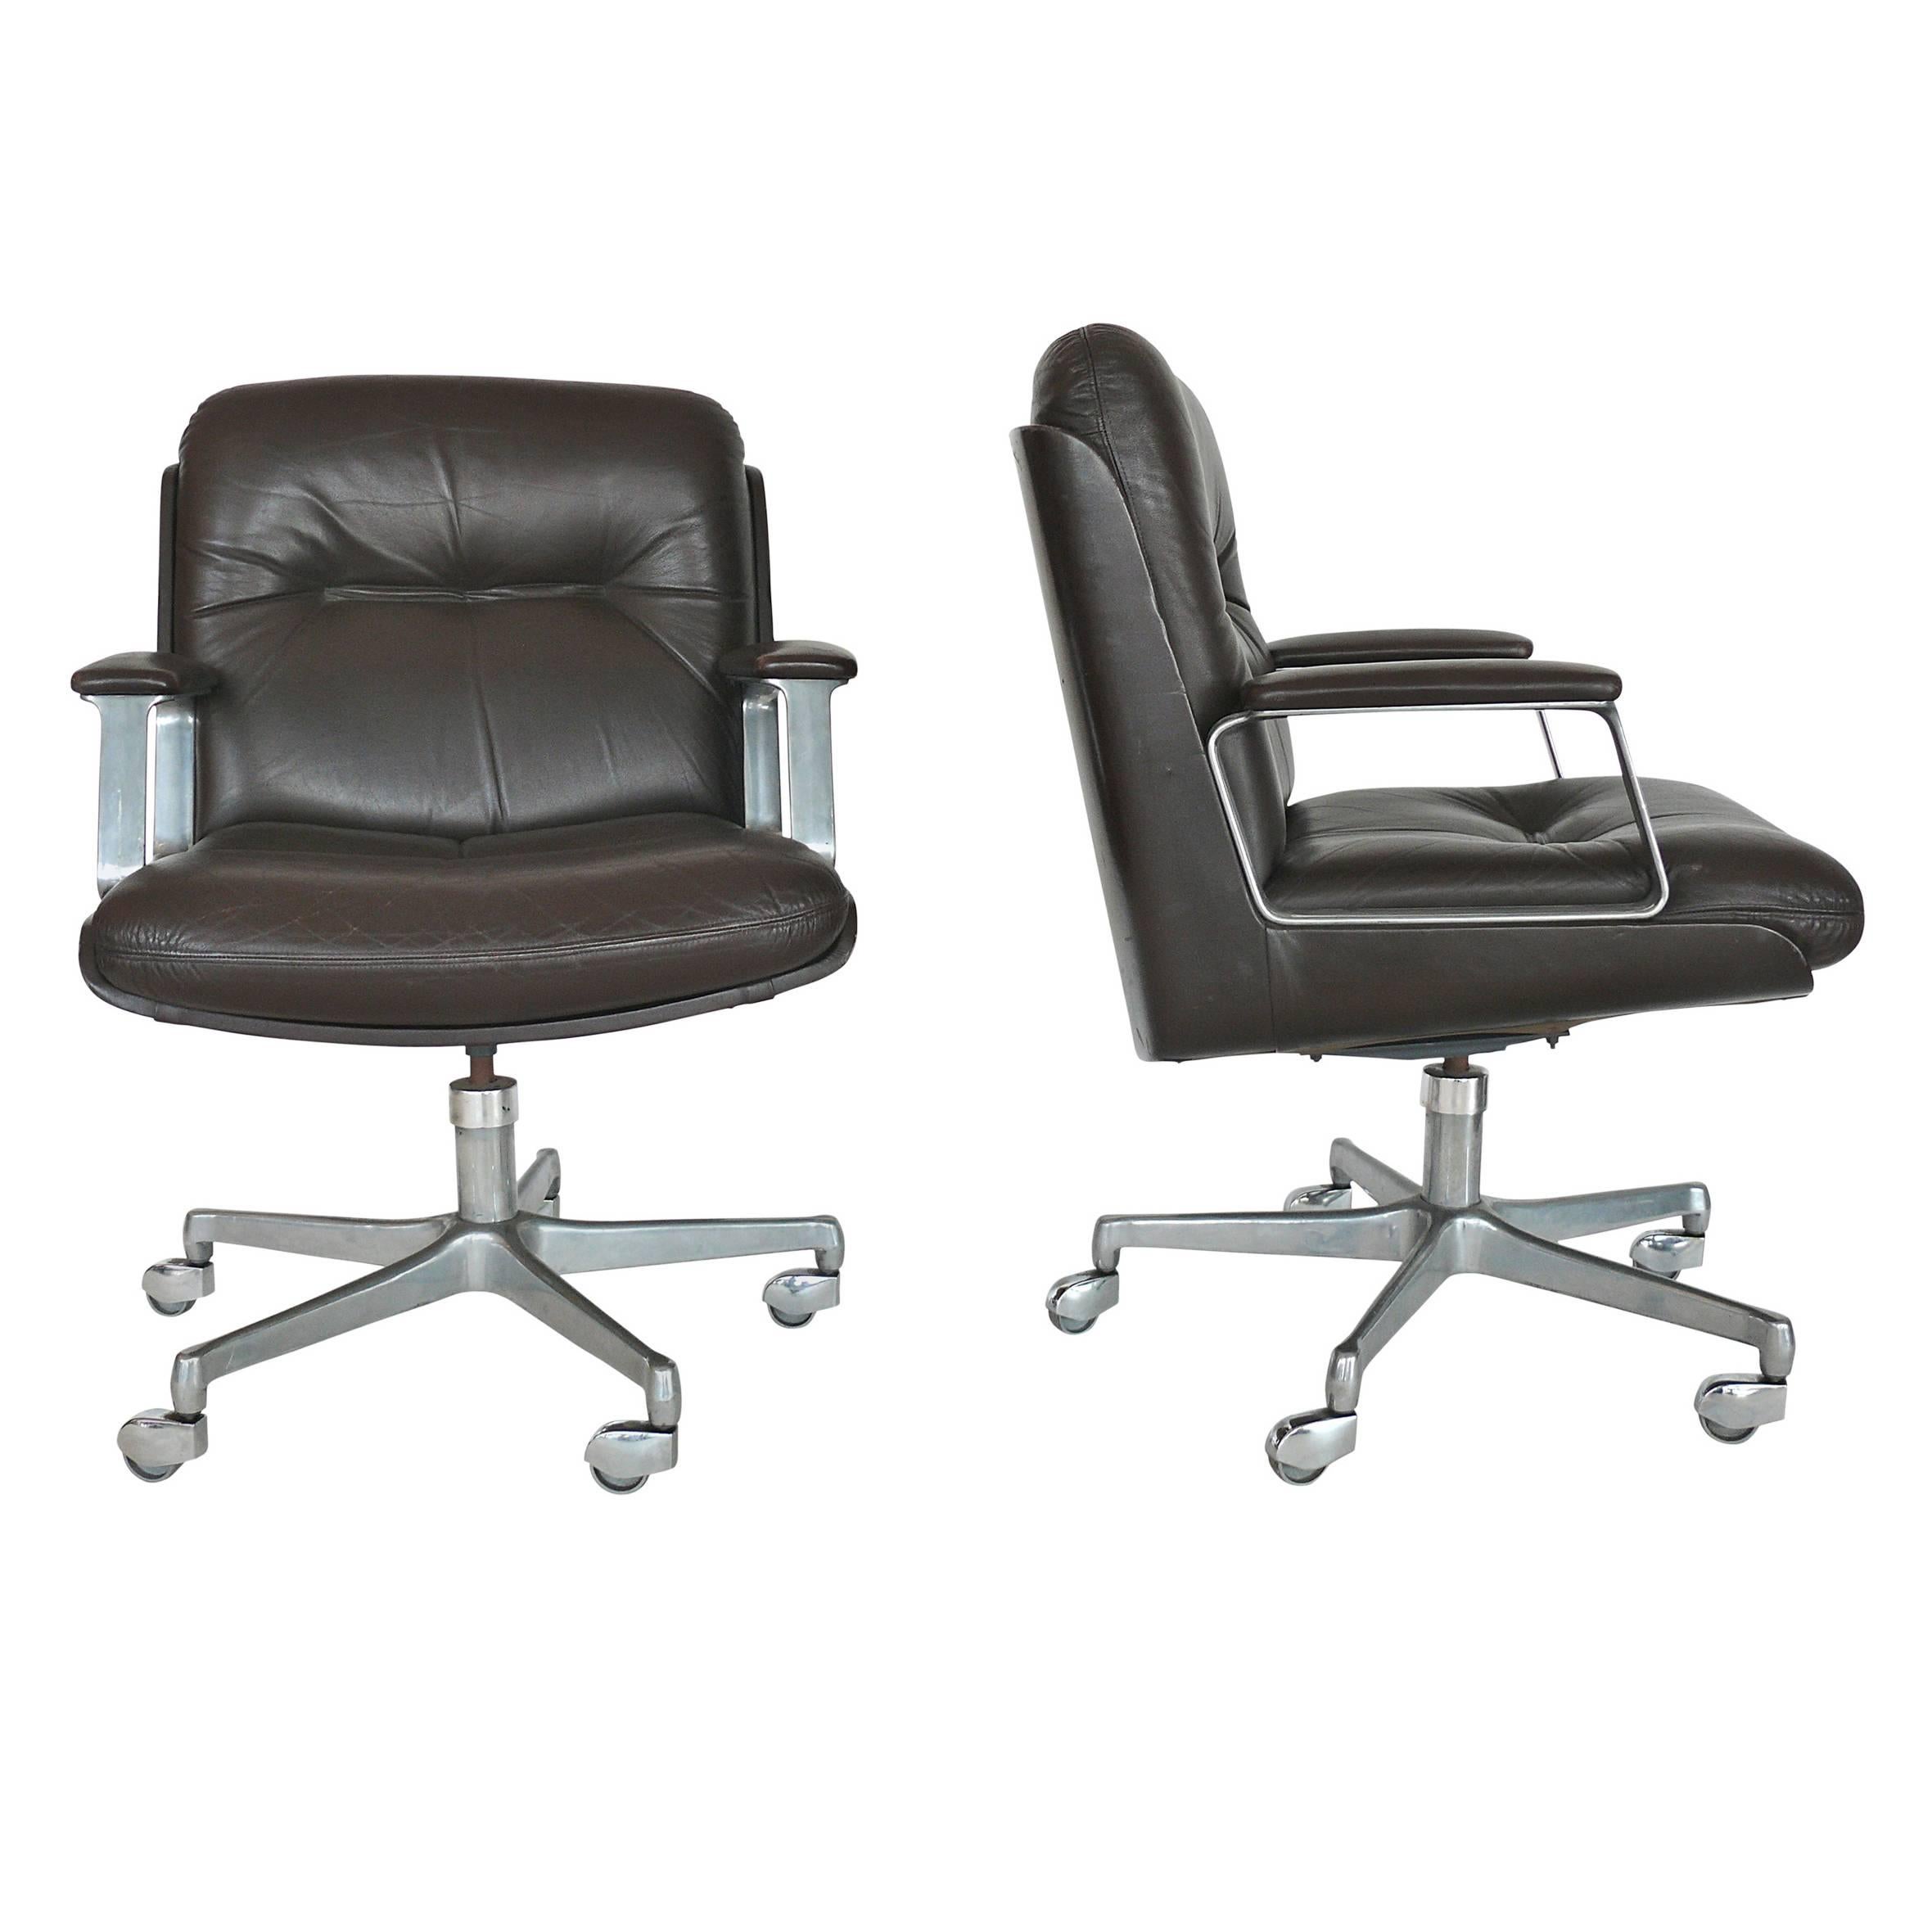 Italian Leather Office Chairs